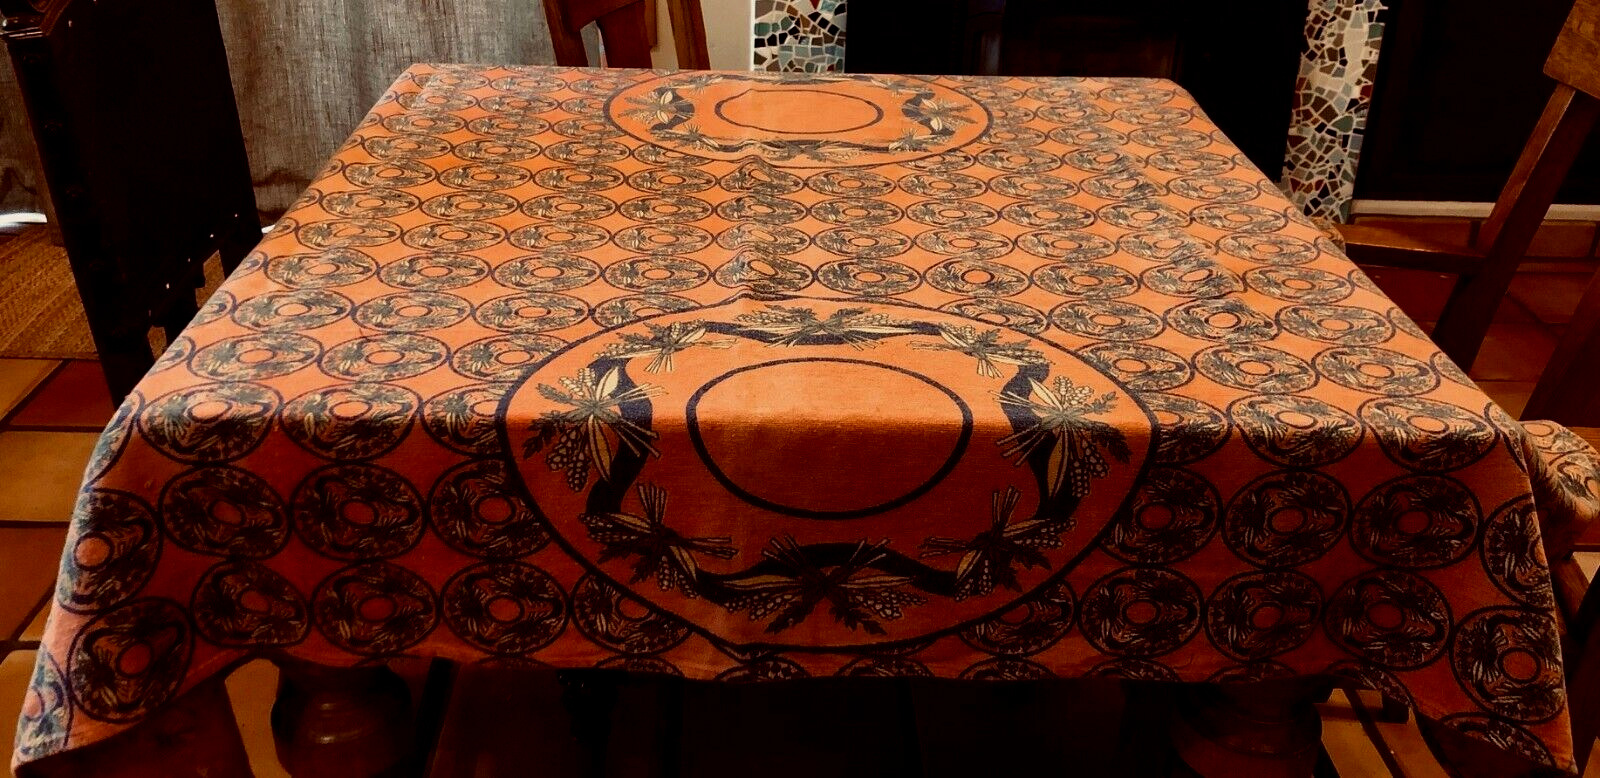 Vintage Mamma Ro Luca, Compagnia Adele Indie, tablecloth